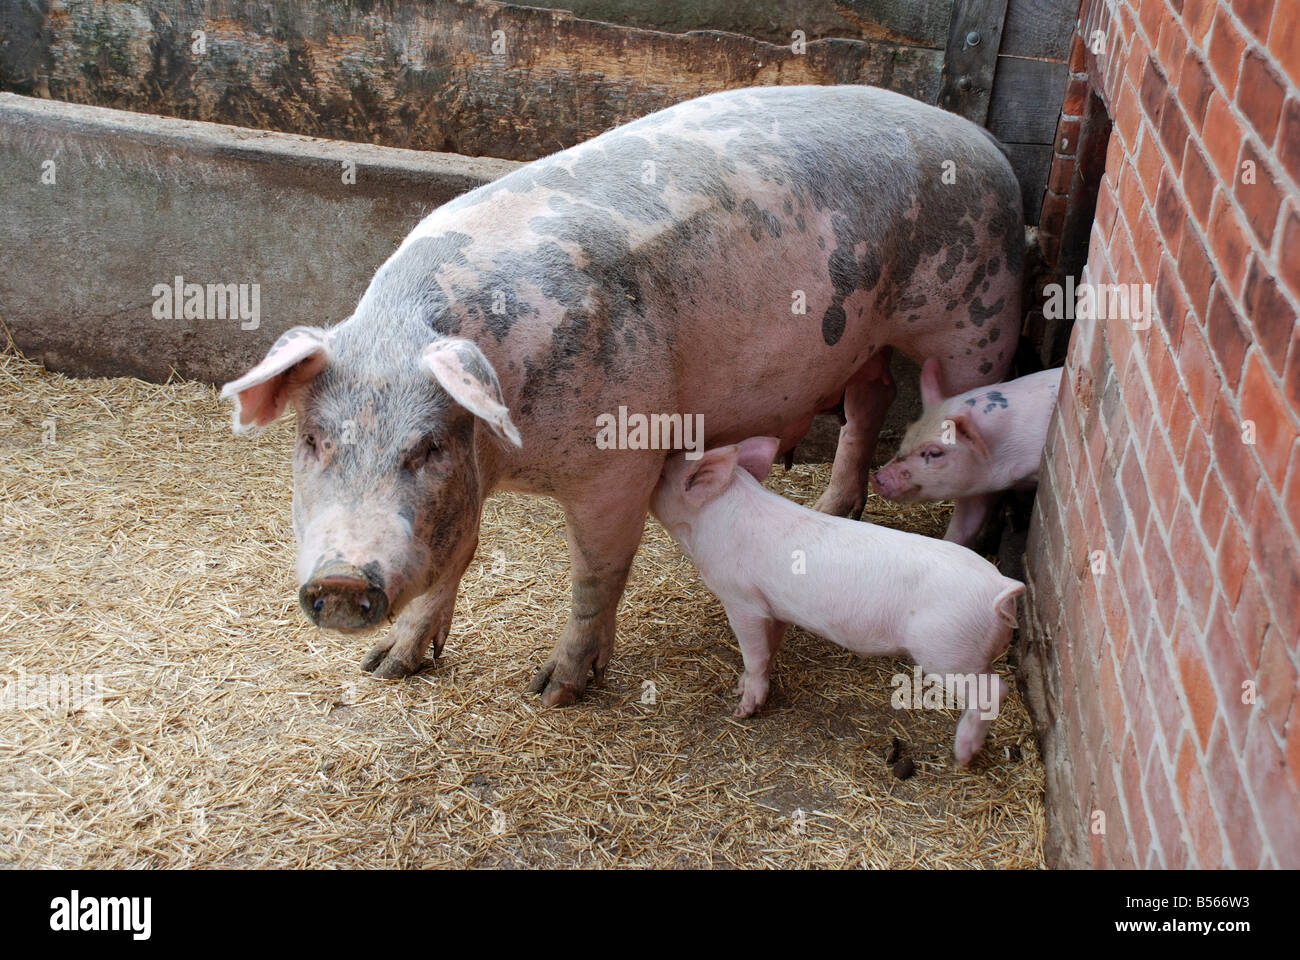 Piglets and mother pig Stock Photo